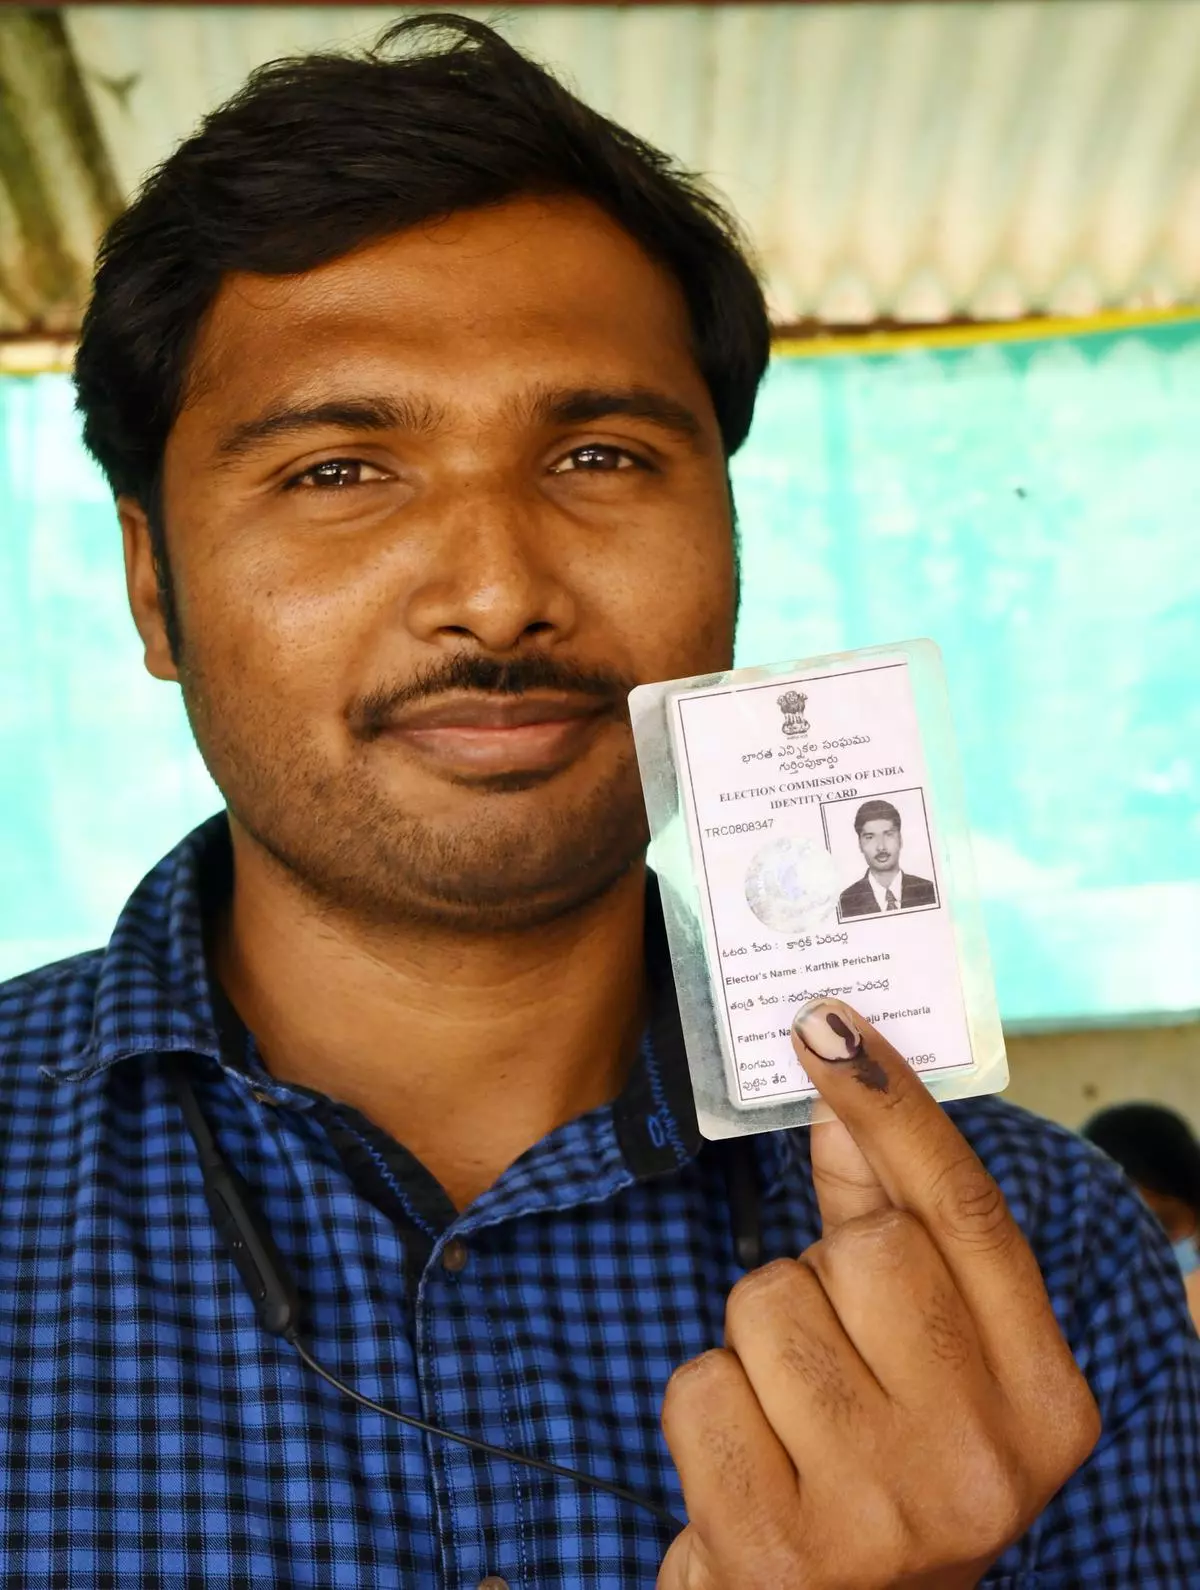 A man holds up his voter id card in front of the camera.